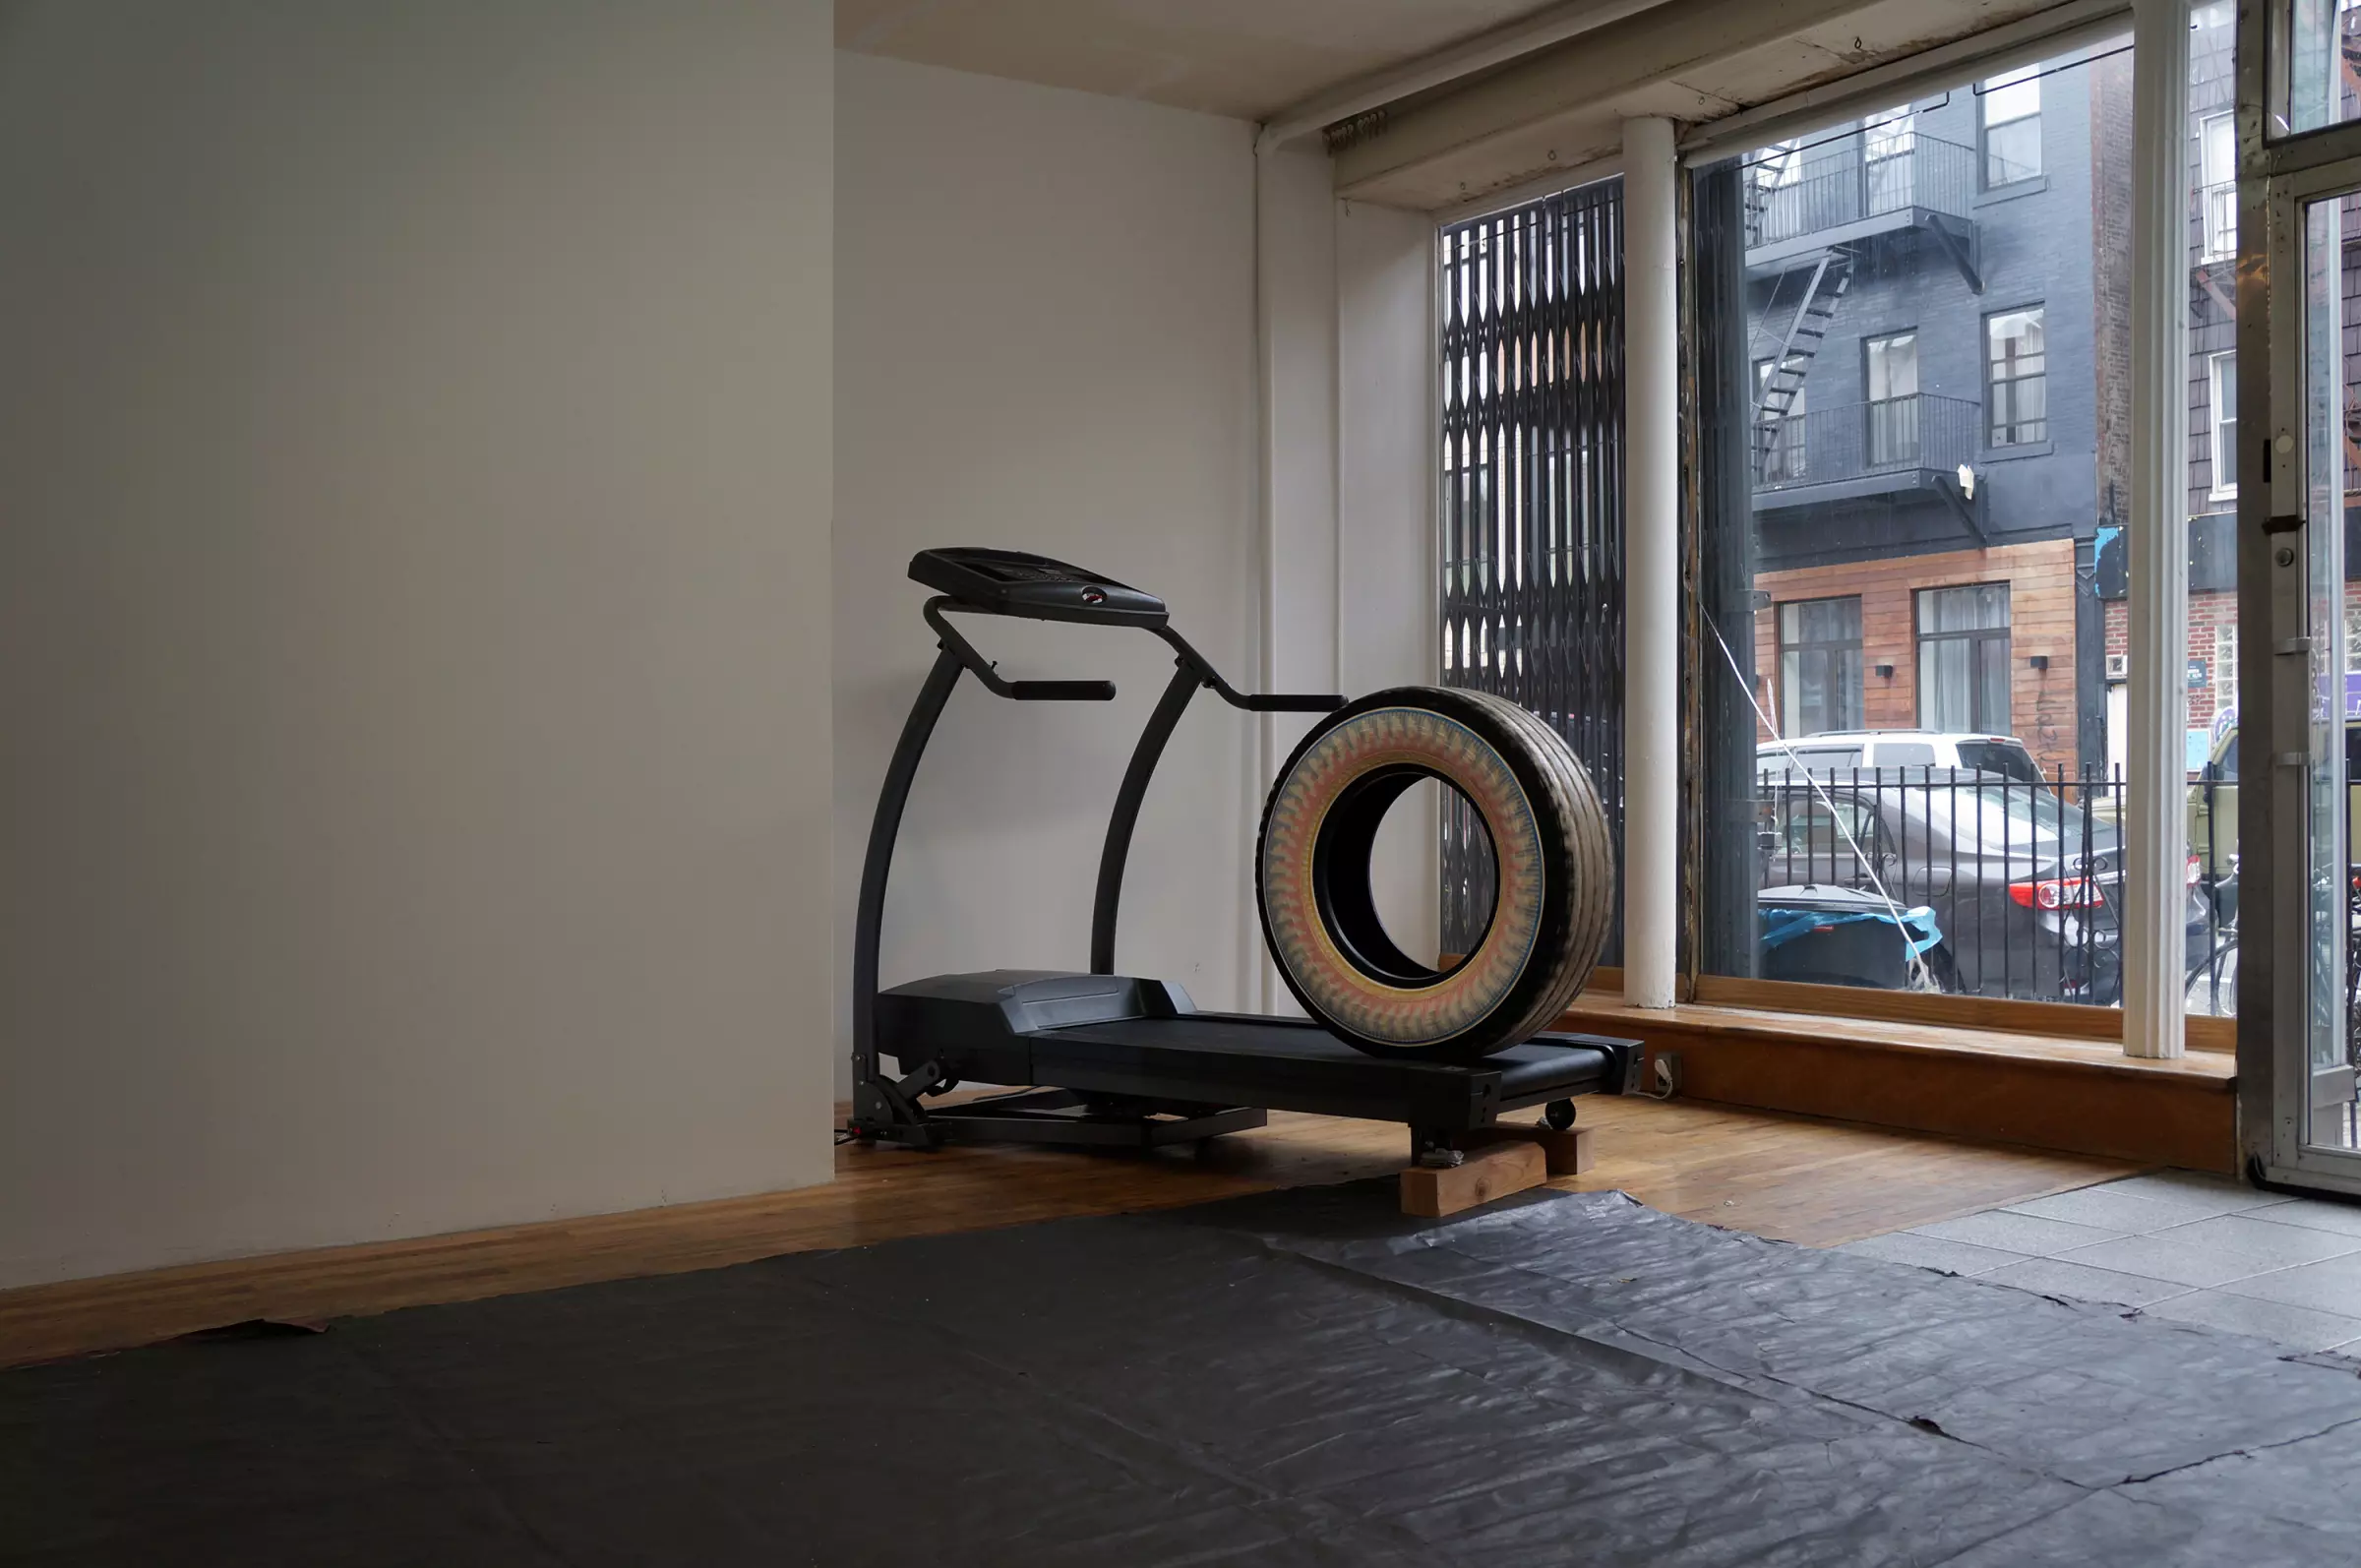 in an empty room a large tire is placed on a treadmill